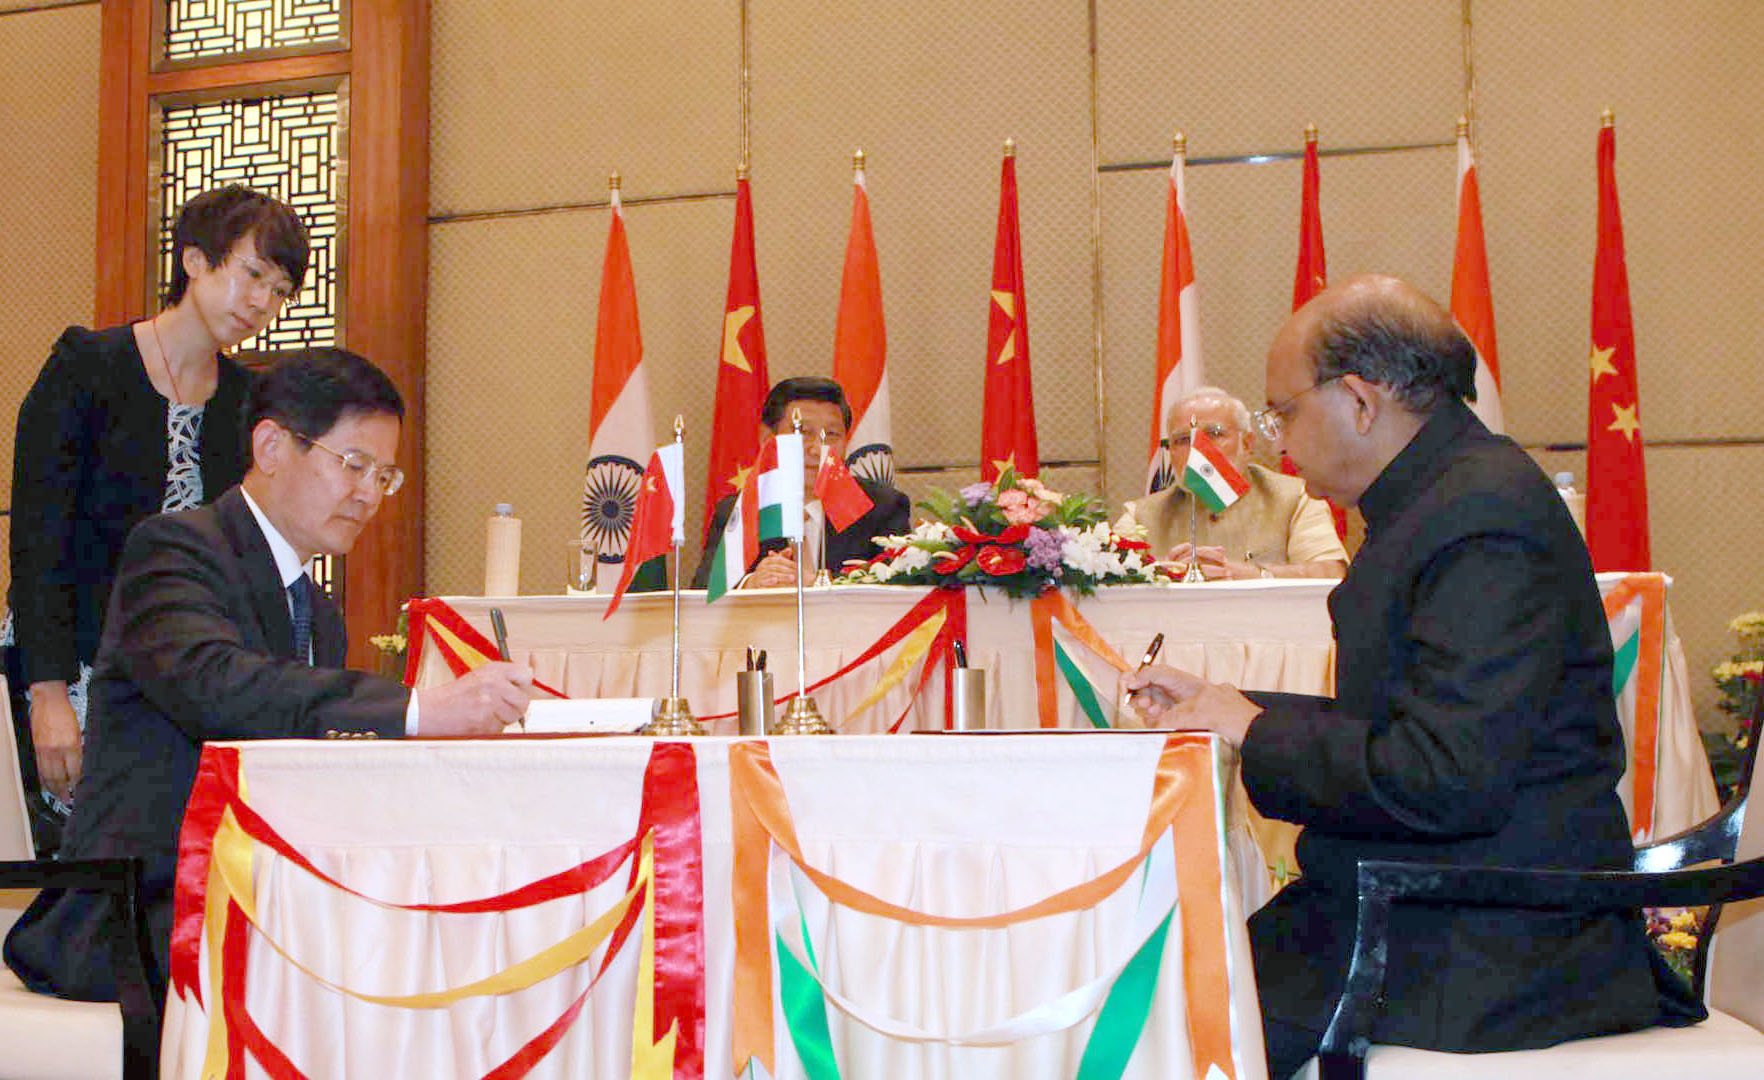 PM modi and Chinese President Xi Jinping witness signing of 3 MoUs in Ahmedabad